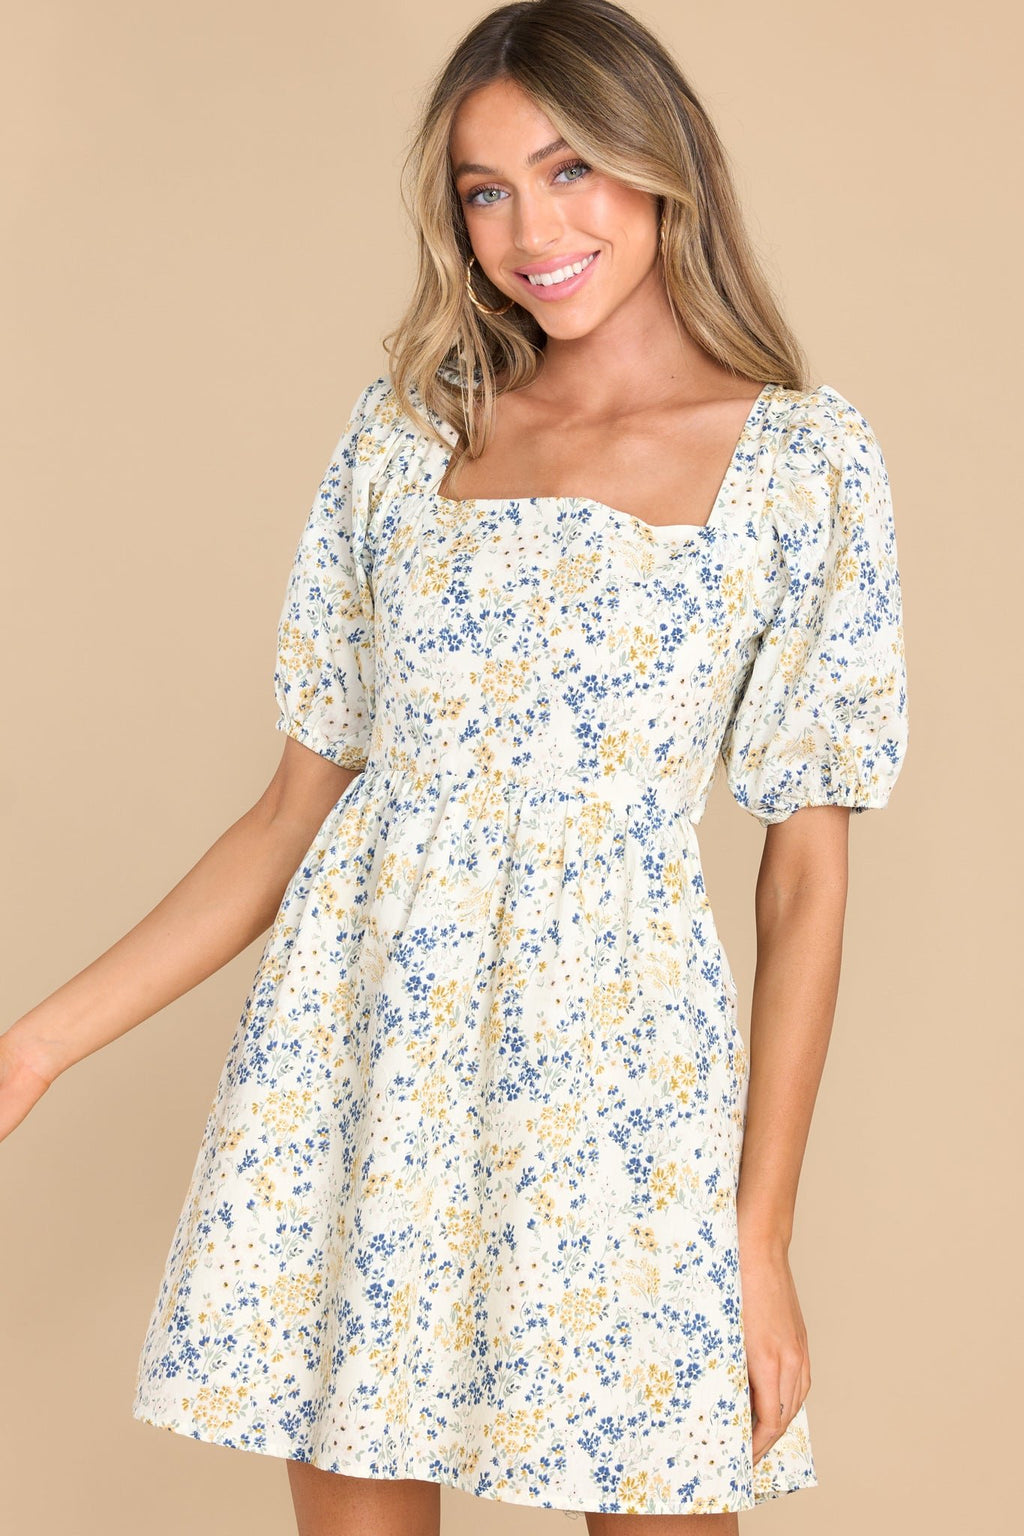 Adorable White Floral Mini - Casual Dresses | Red Dress